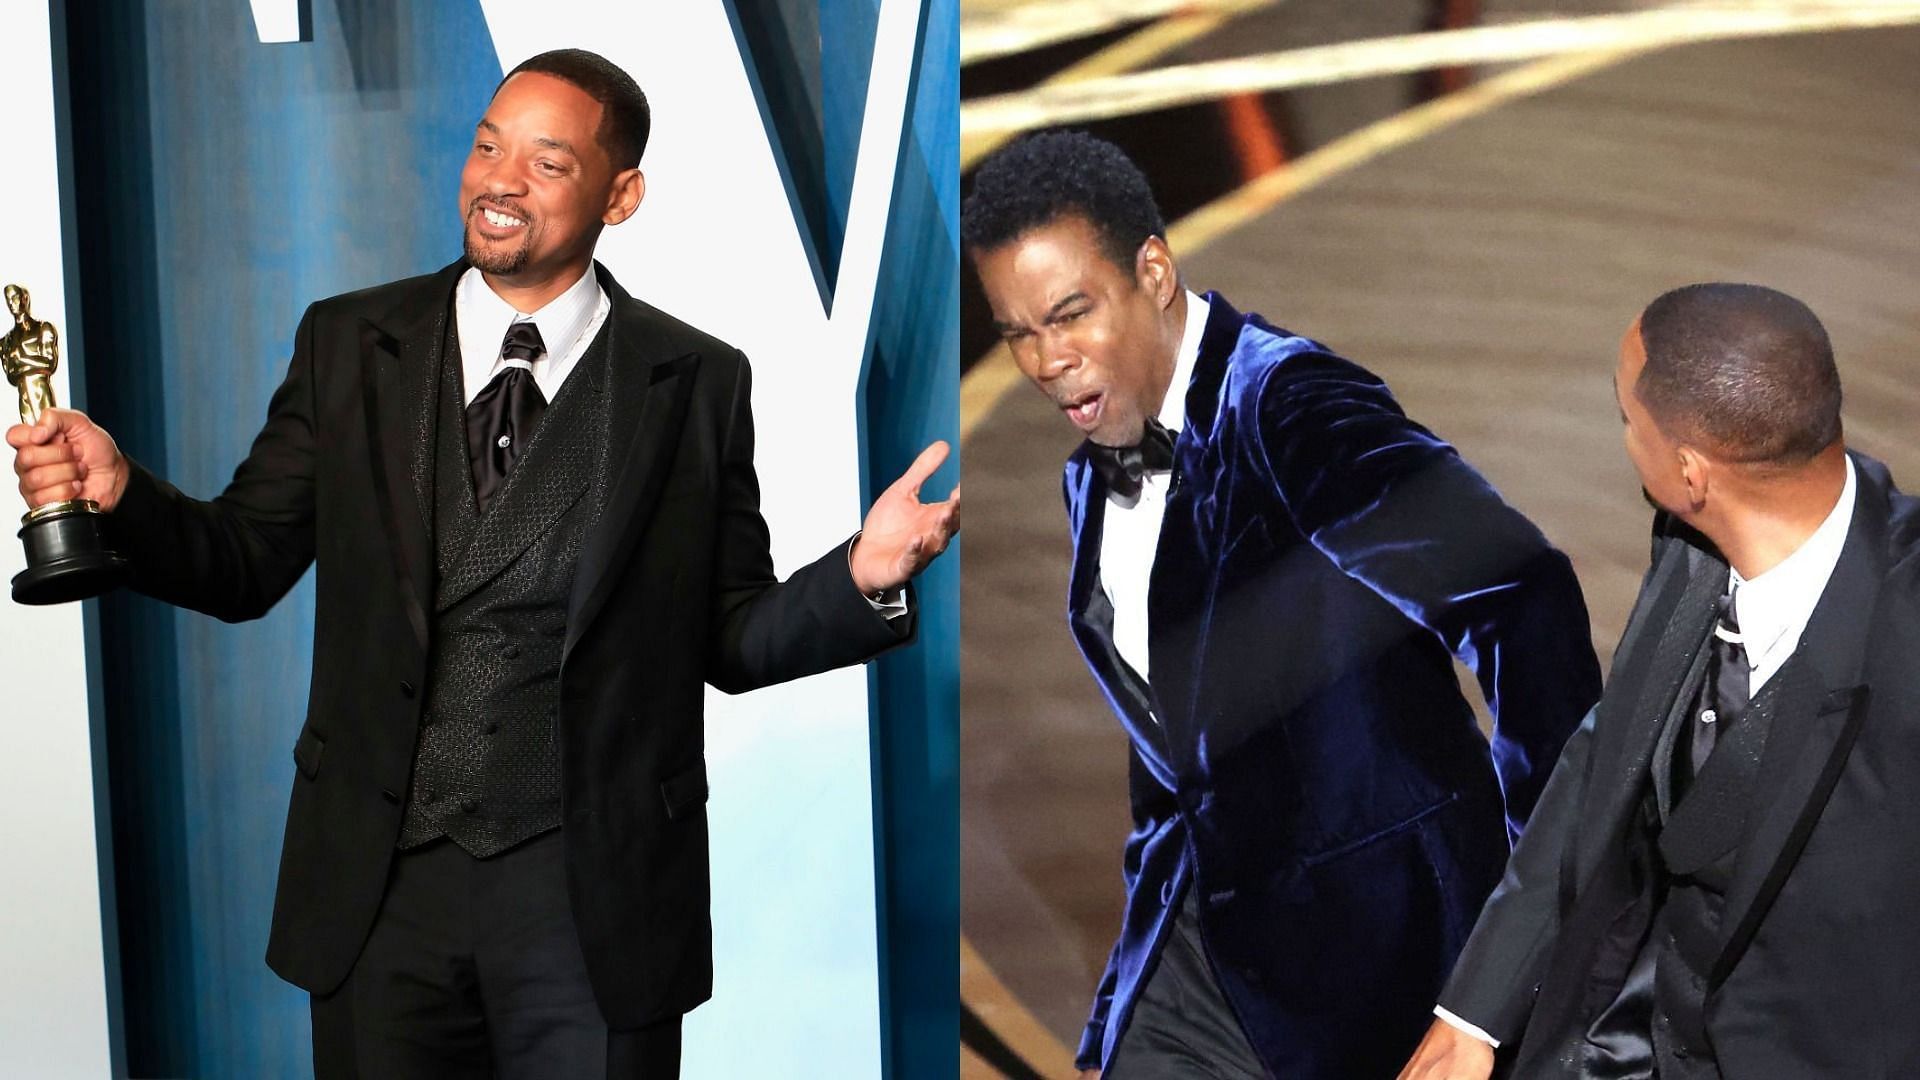 Will Smith has decided to resign from The Academy after slapping Chris Rock at the 2022 Oscars (Image via P. Lehman/Getty Images and Myung Chun/Getty Images)